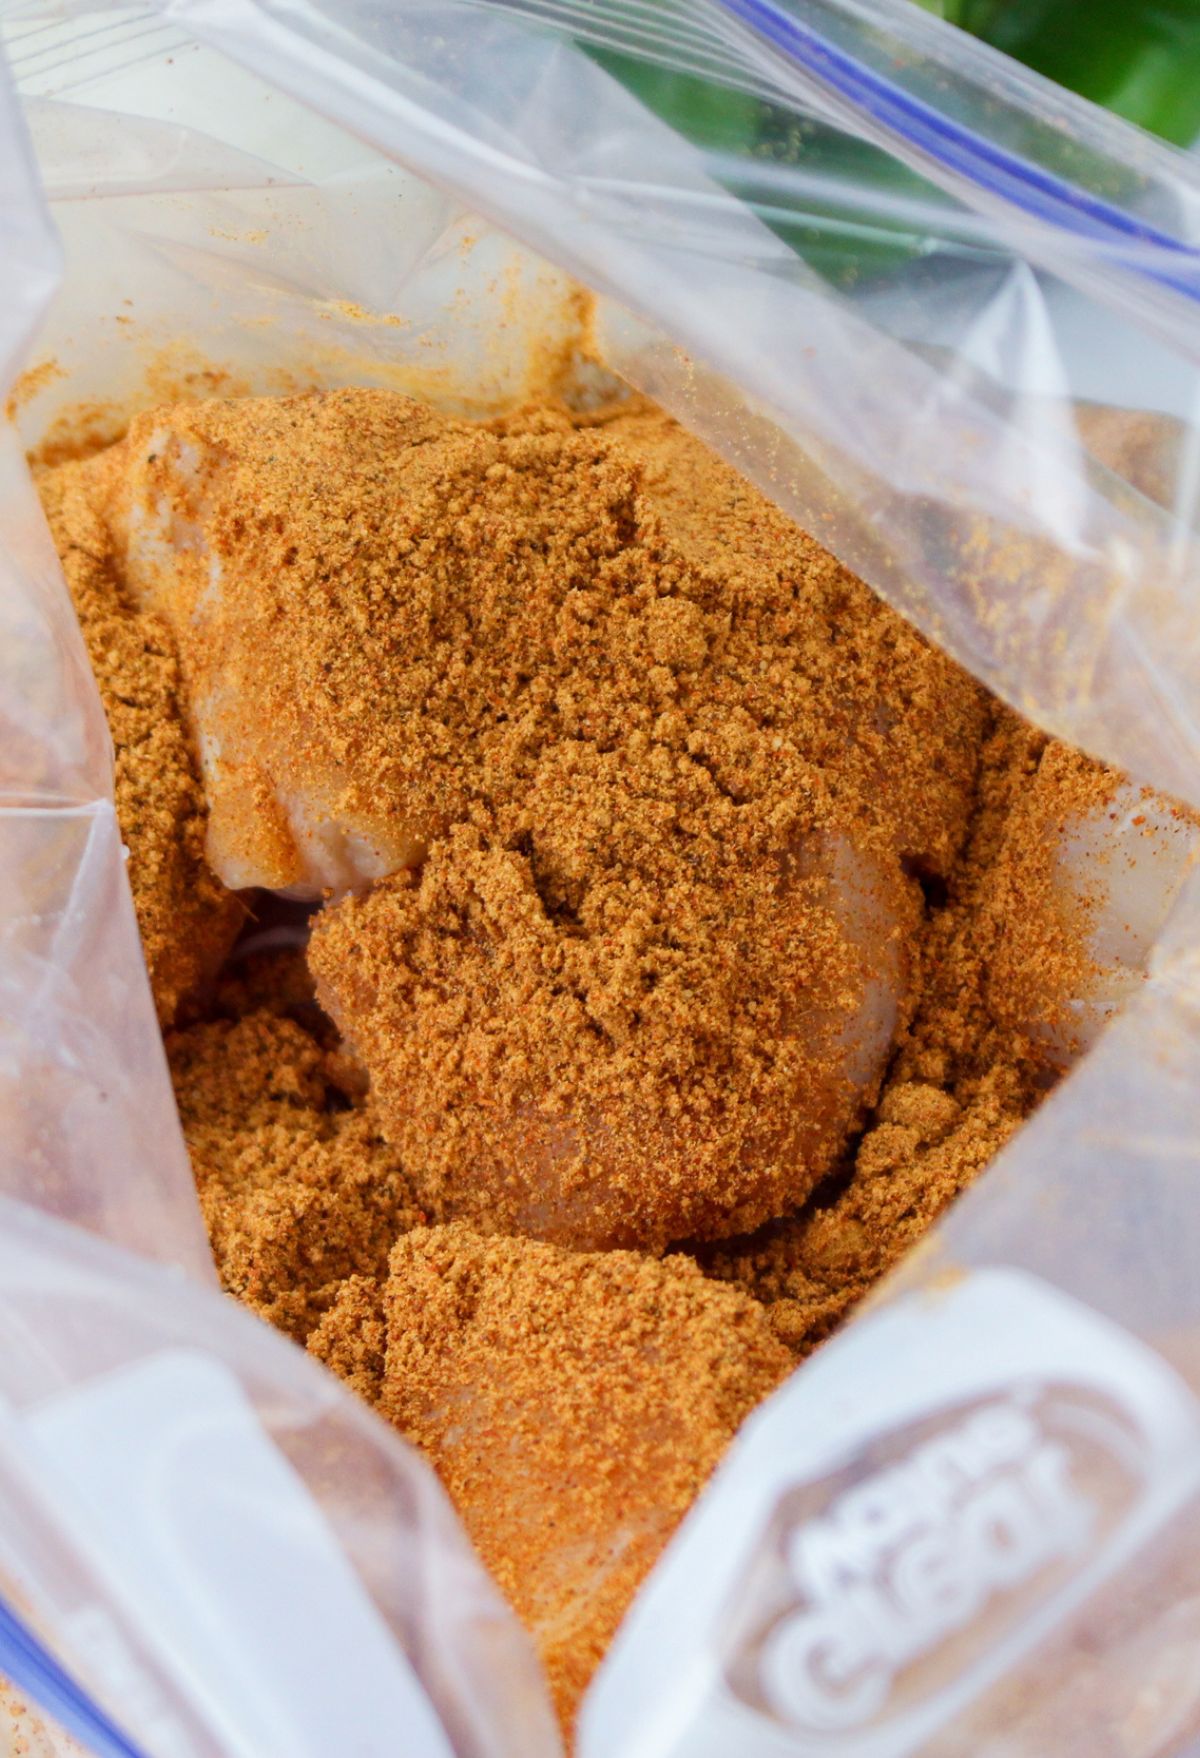 A bag filled with seasoned chicken in a plastic bag.